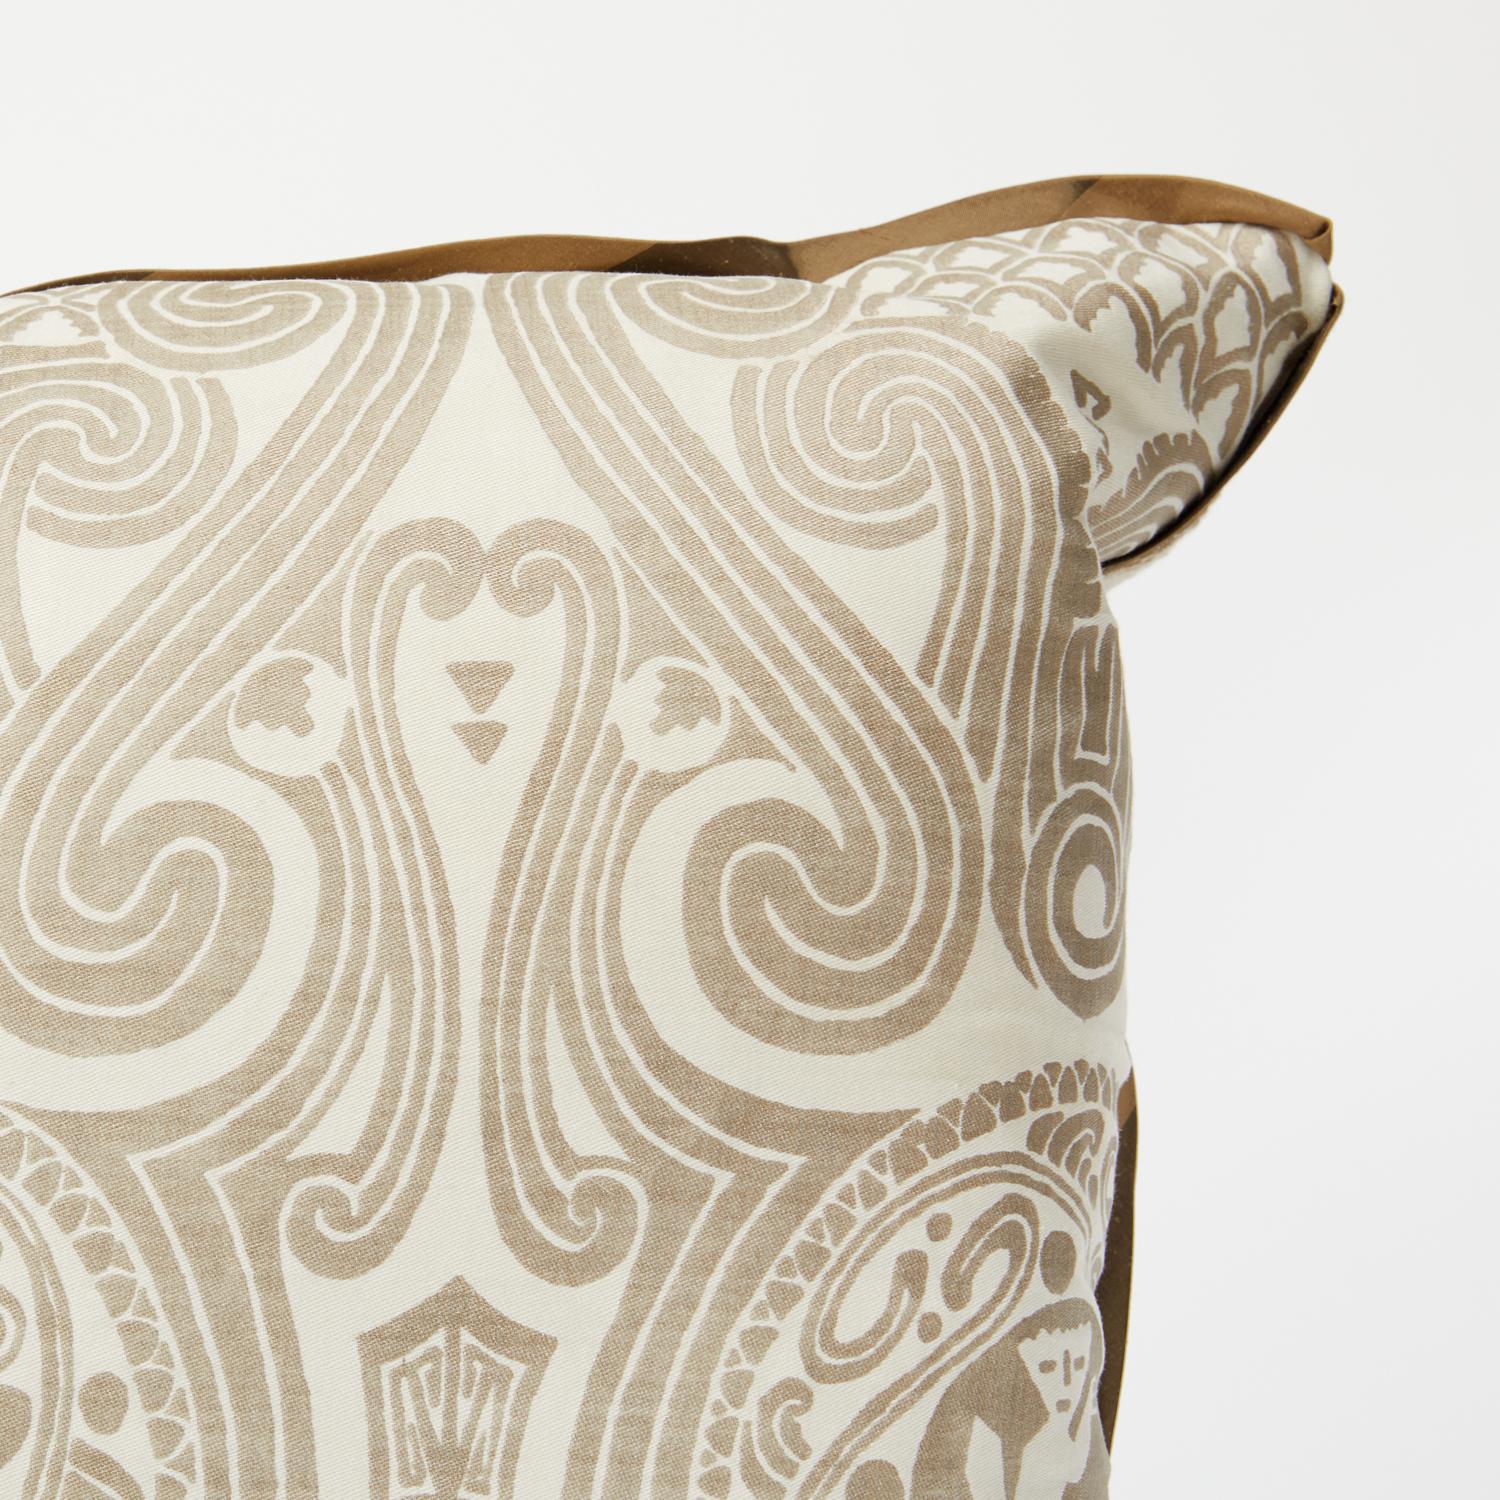 Pair of Fortuny Fabric Cushions in the Peruviano Pattern In New Condition For Sale In New York, NY